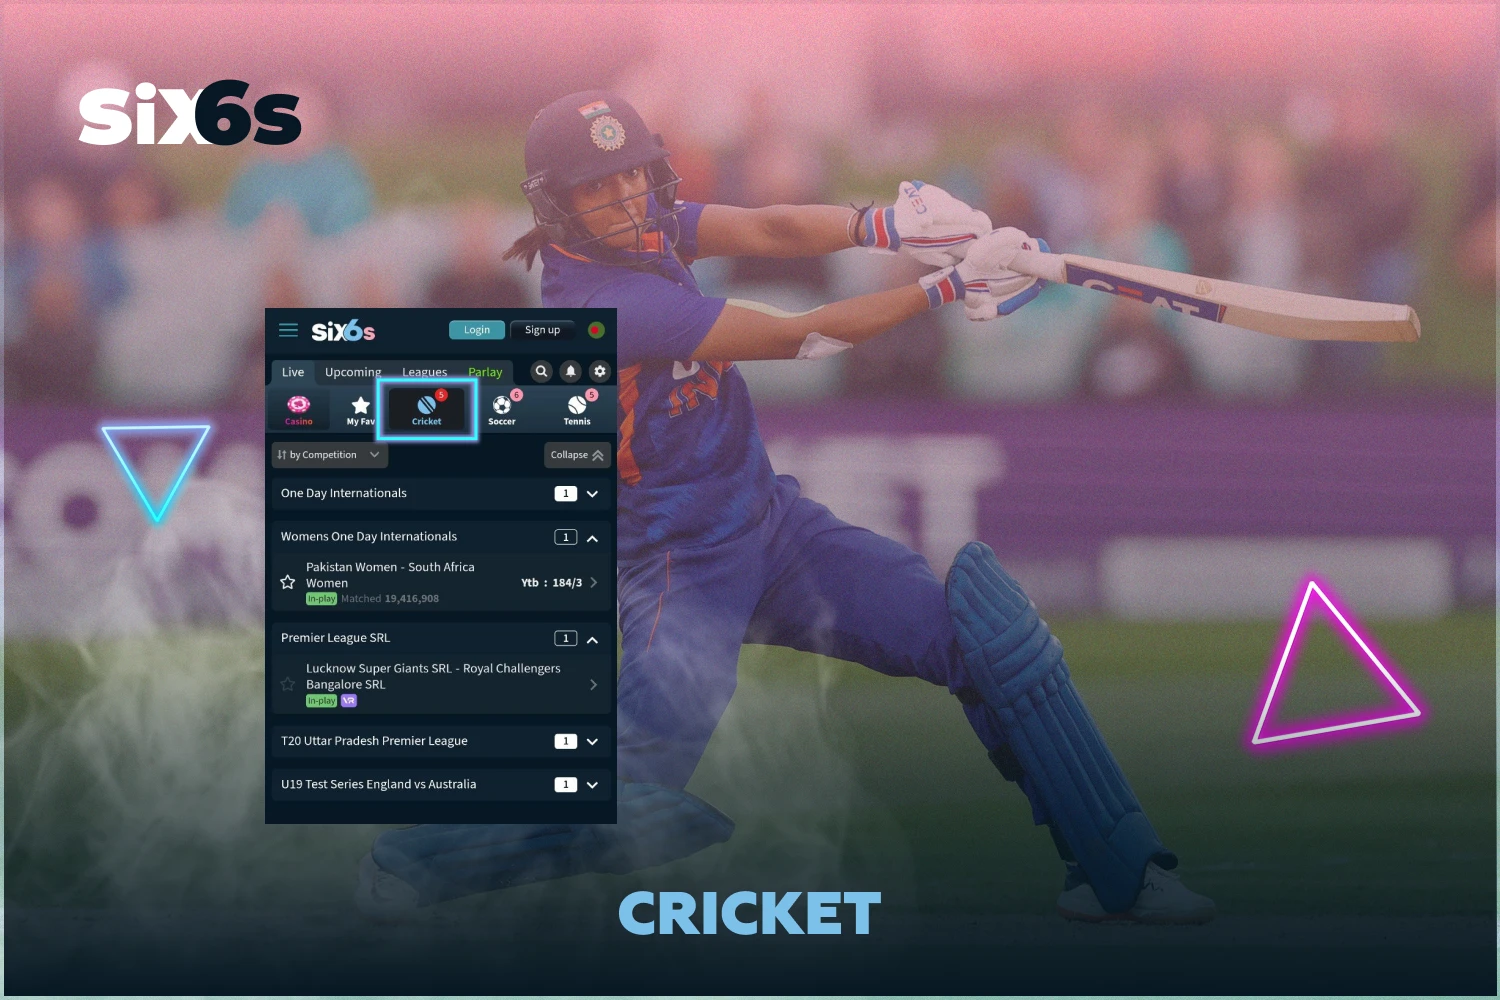 Six6s offers everything Bangladeshi players need to bet on cricket